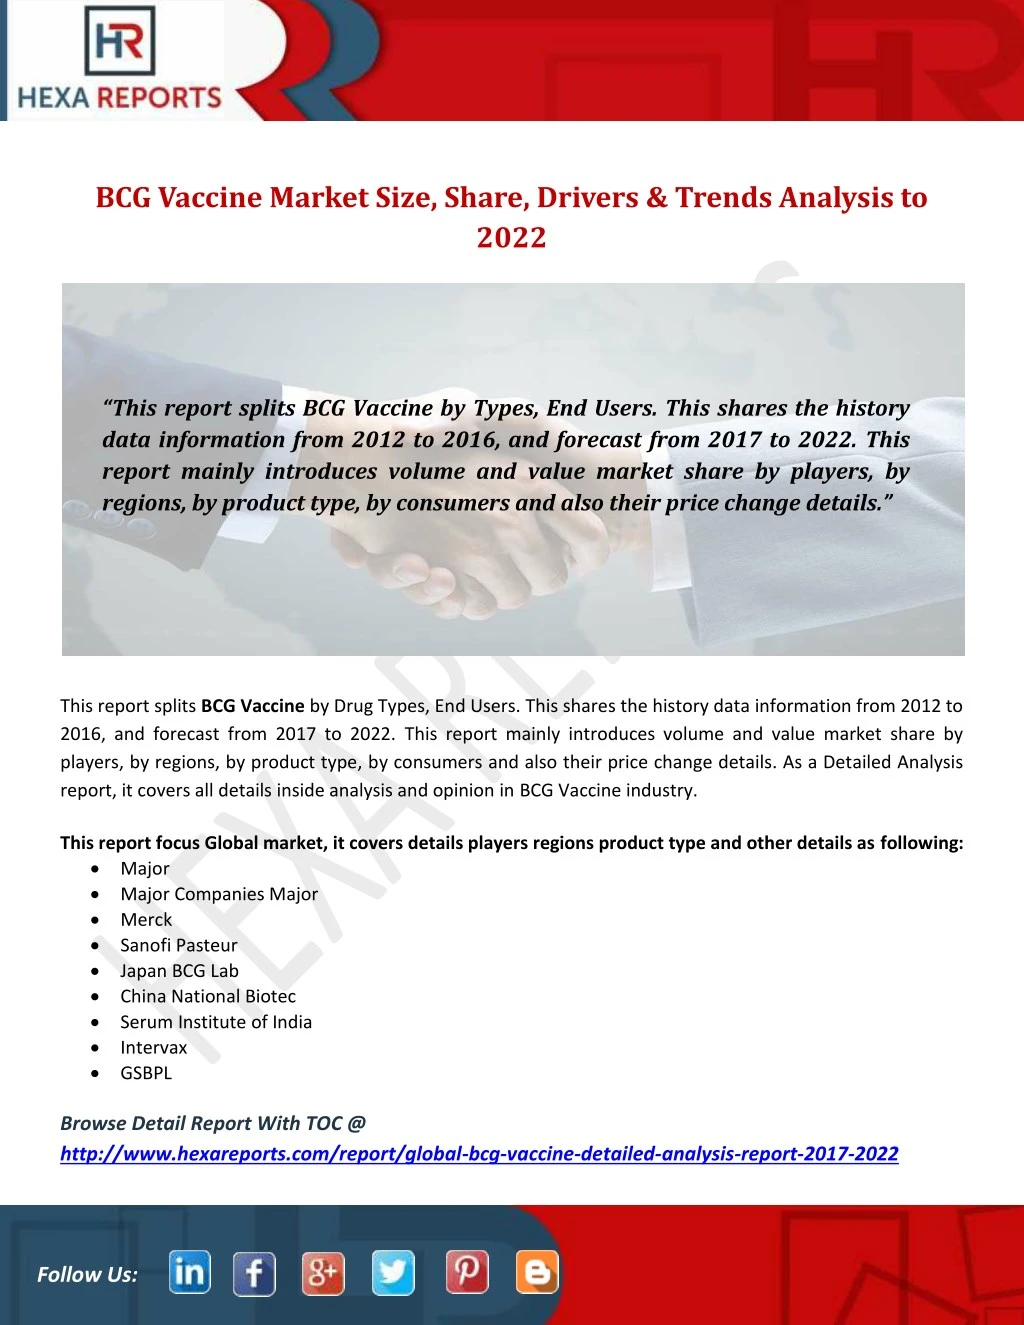 bcg vaccine market size share drivers trends